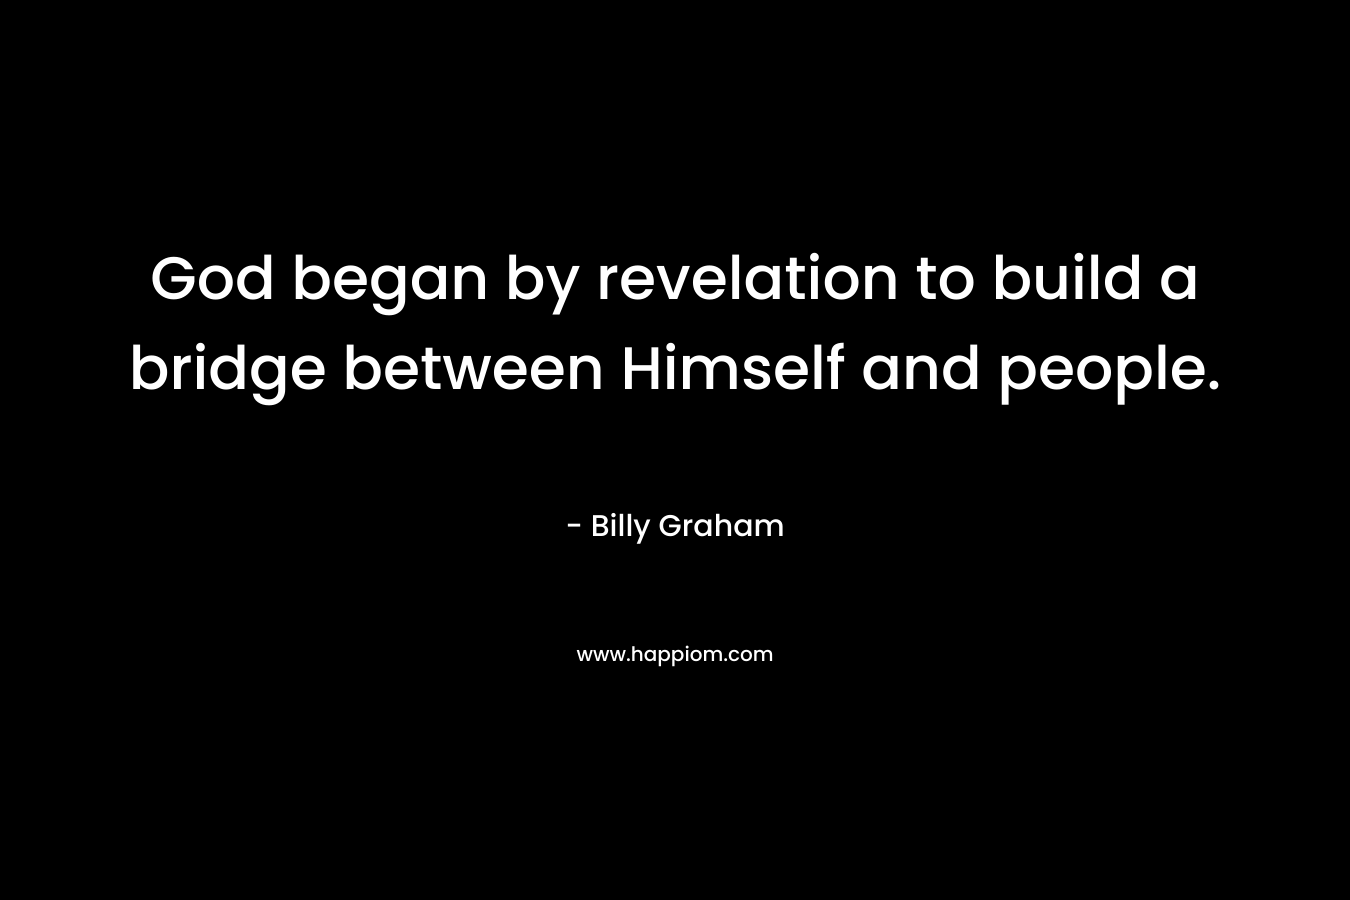 God began by revelation to build a bridge between Himself and people.